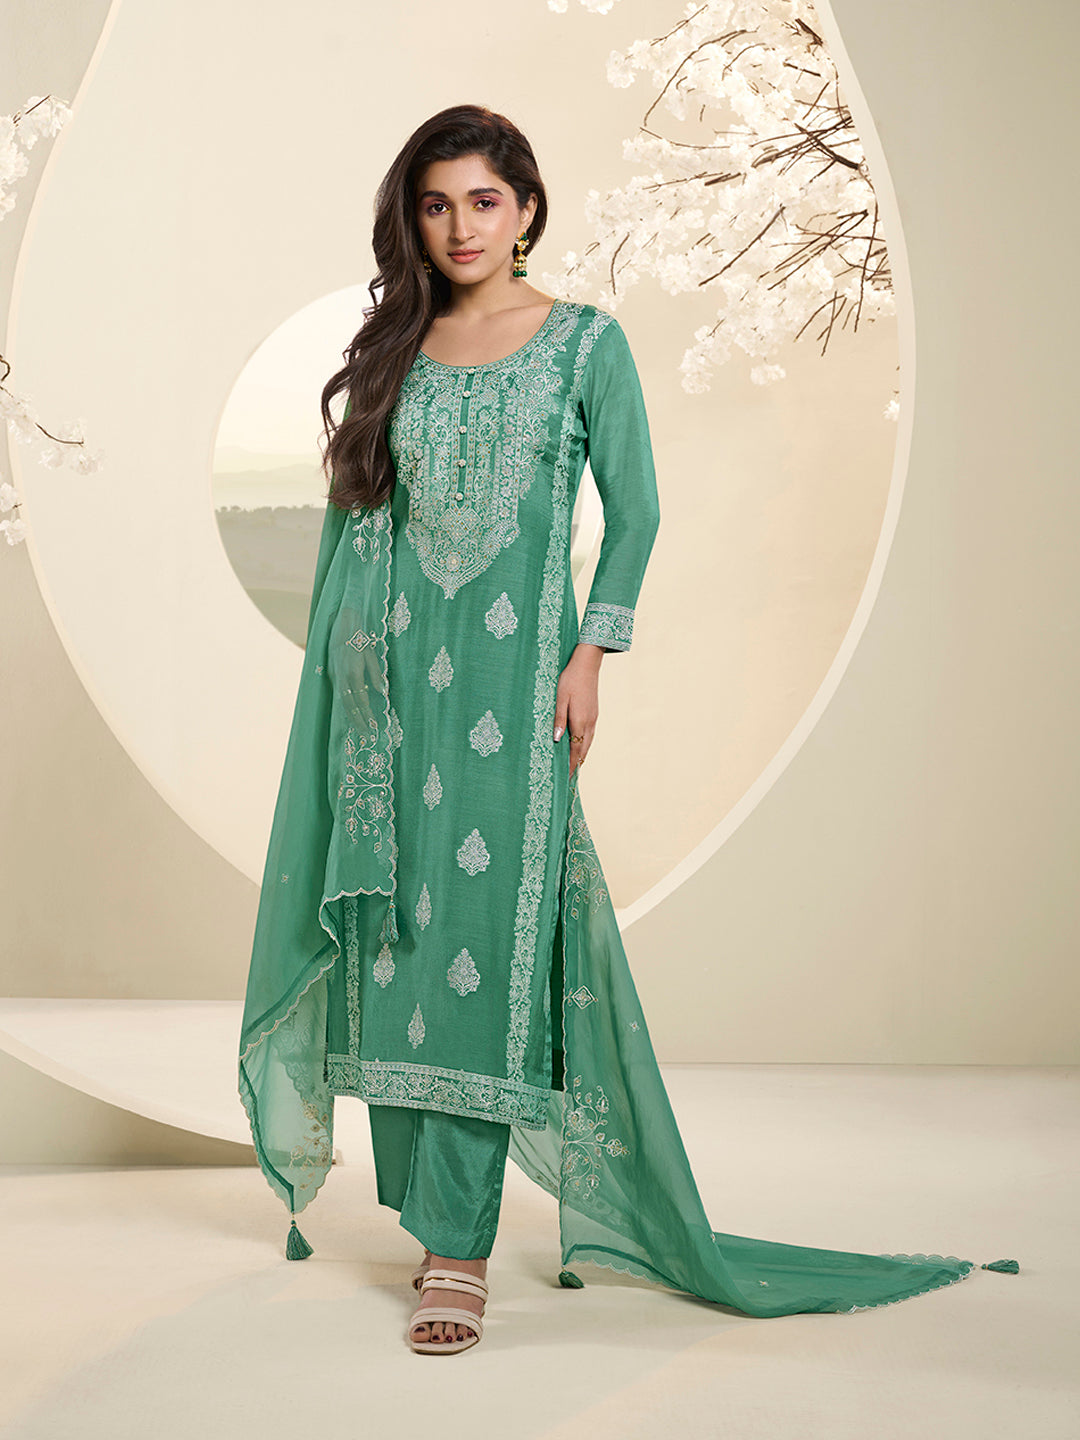 Green Muslin Jacquard Kurta Suit Set with HandCrafted Buttons Product vendor